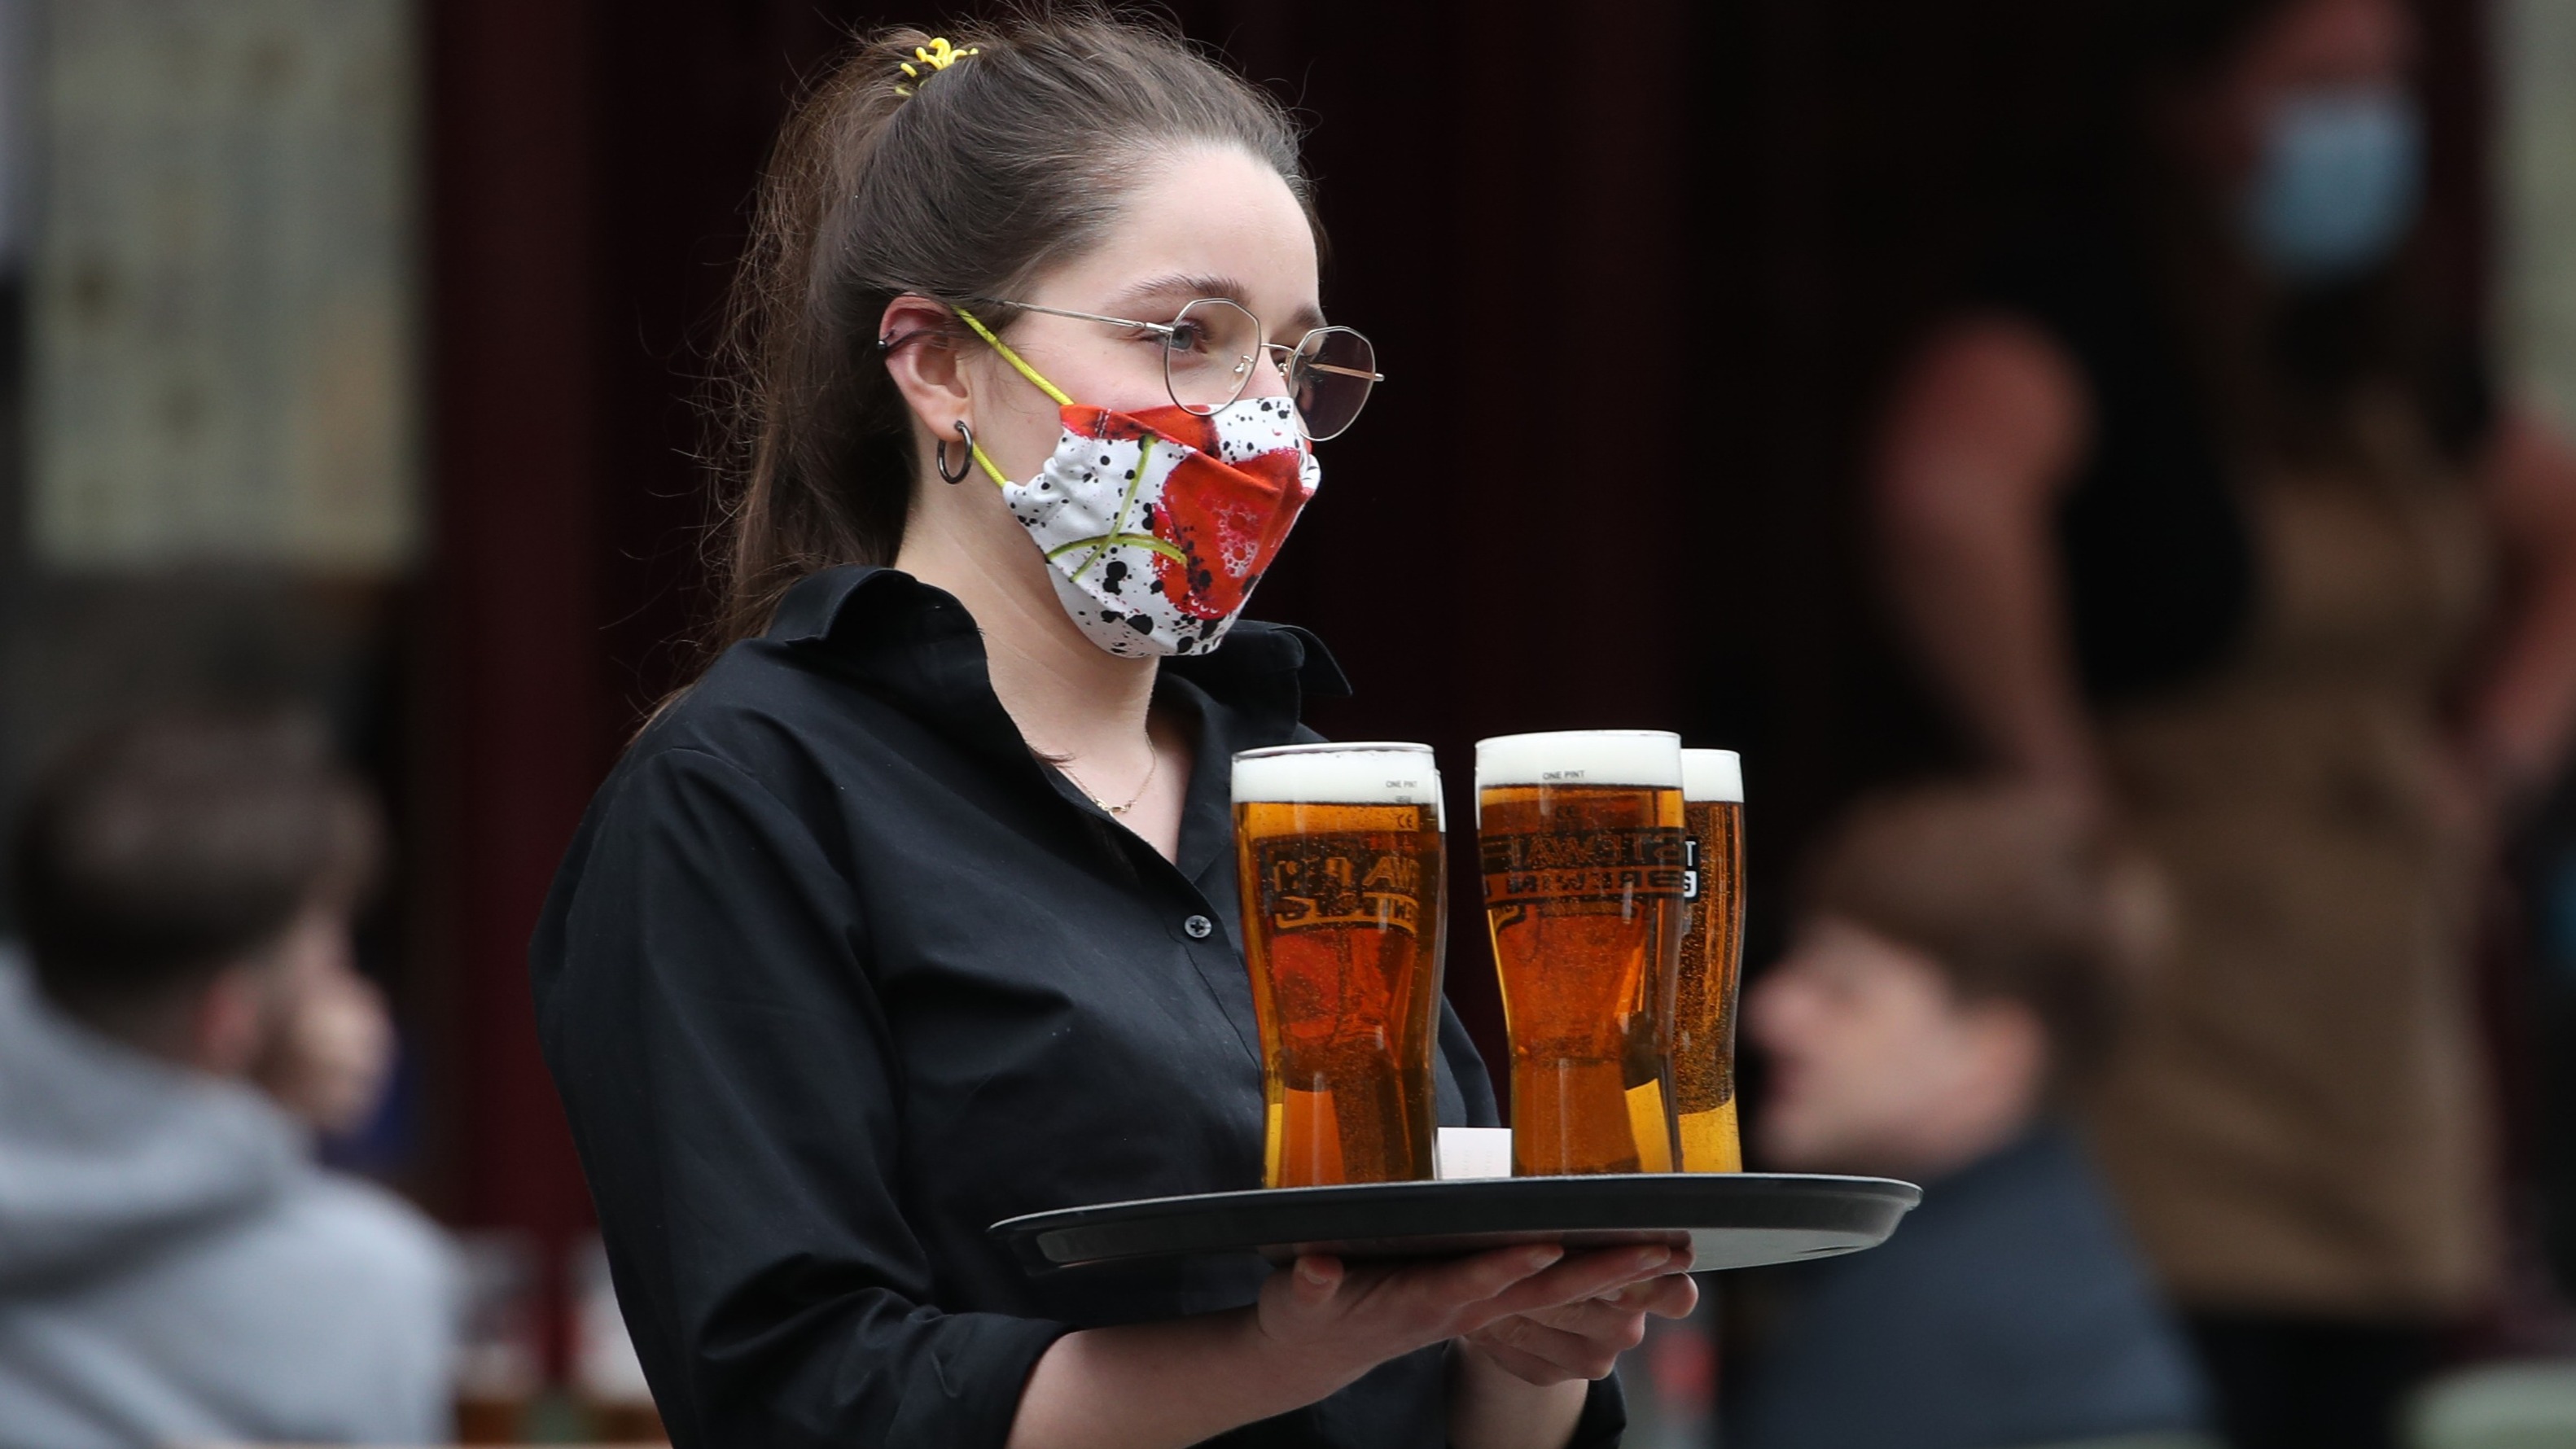 Will Britain's pubs survive if Covid restrictions aren't lifted on June 21?